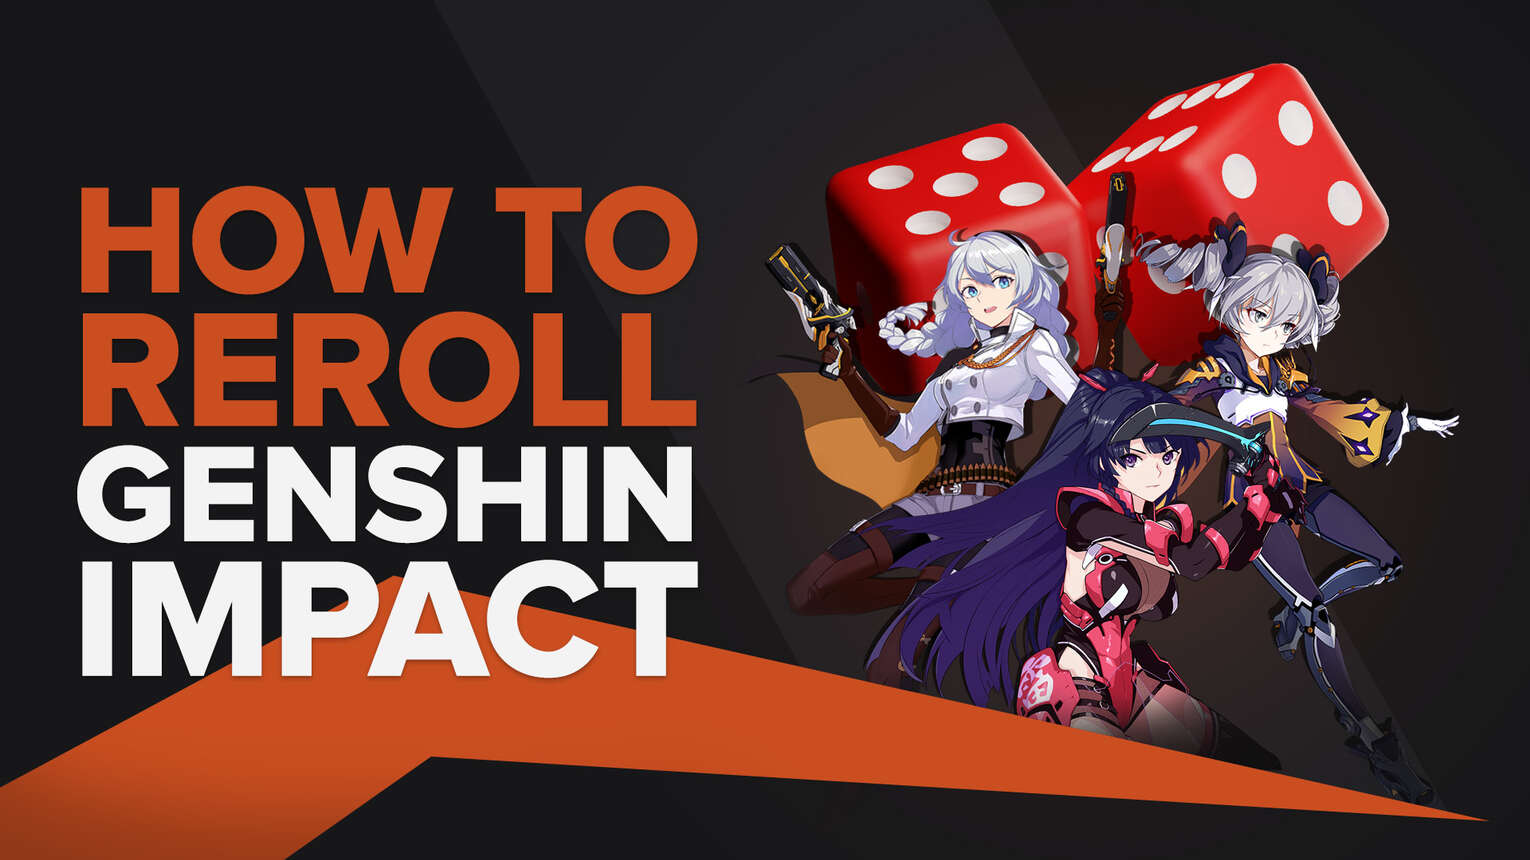 How To Reroll In Genshin Impact? A guide to the Pity System